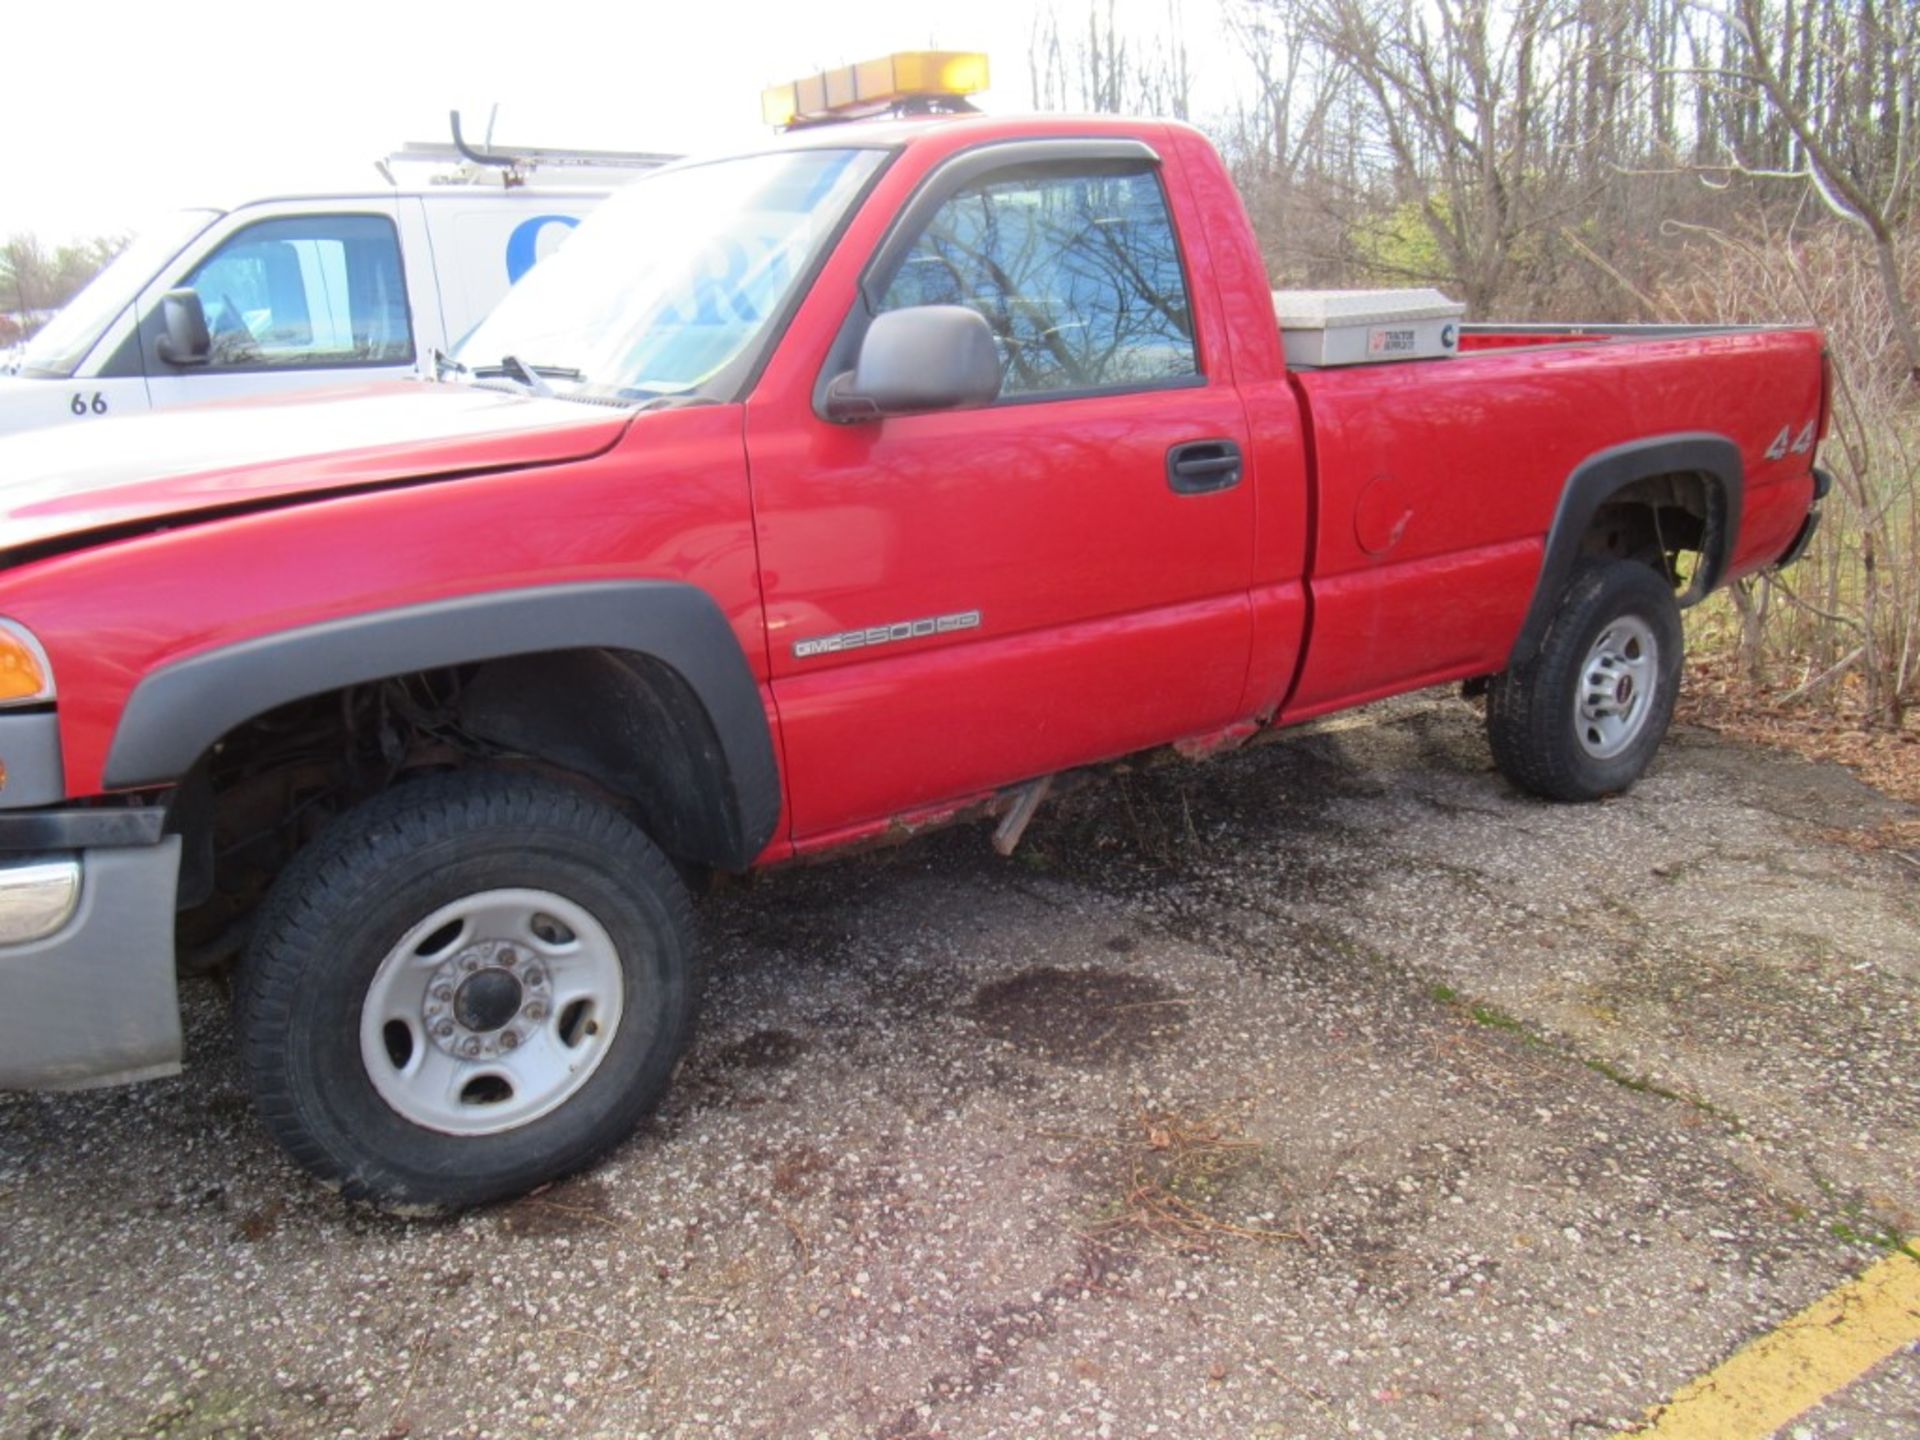 2005 GMC 2500 HD Pickup with Snow Plow, VIN 1GTHK24U05E308334, 4 WD, Automatic, AM/FM, Started - Image 9 of 37